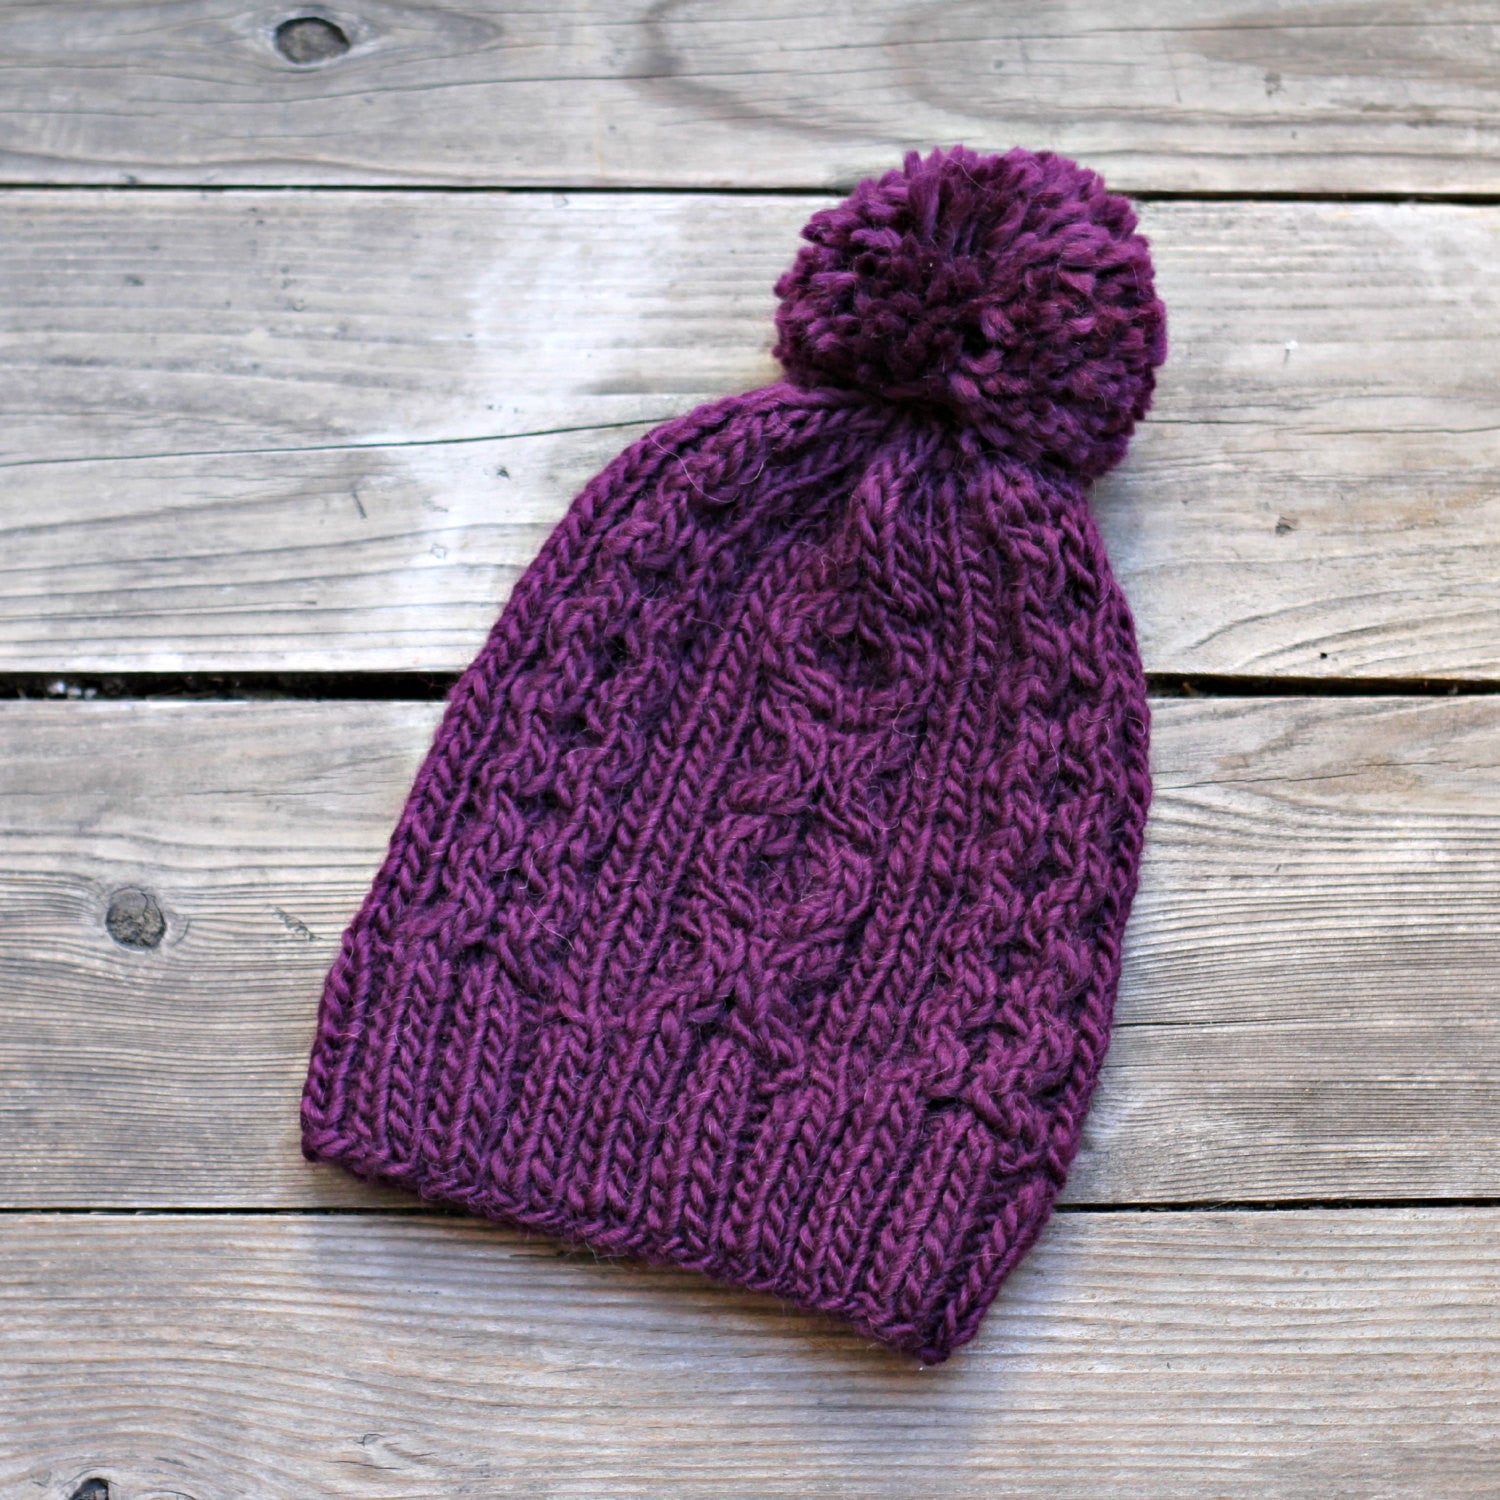 Knit hat with cables pattern